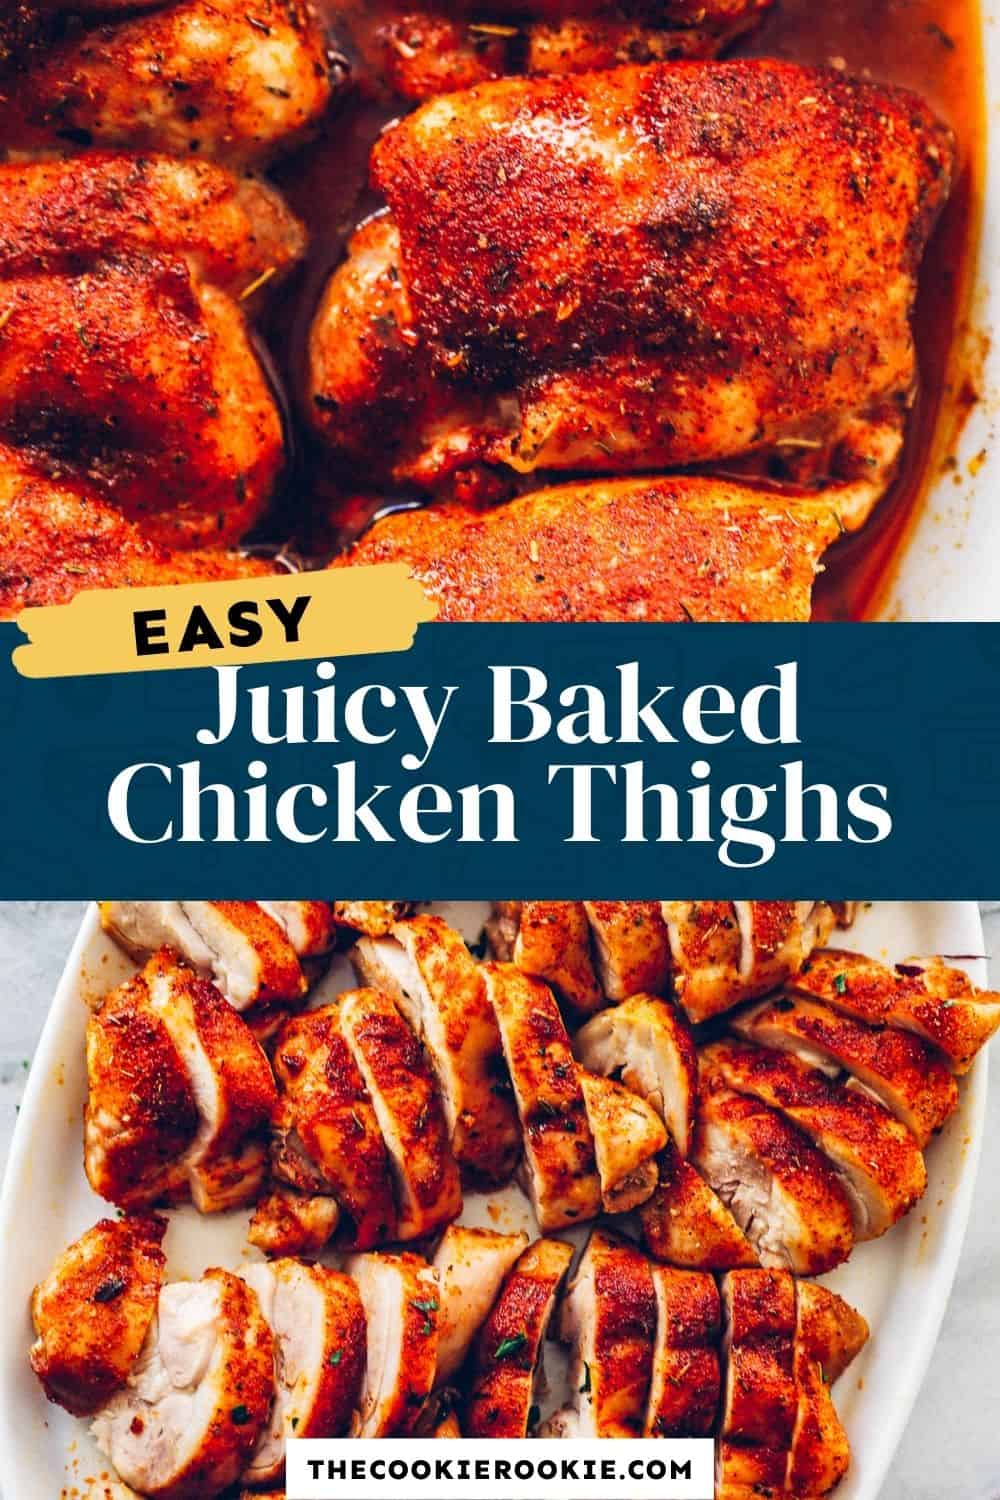 Baked Chicken Thighs - The Cookie Rookie®